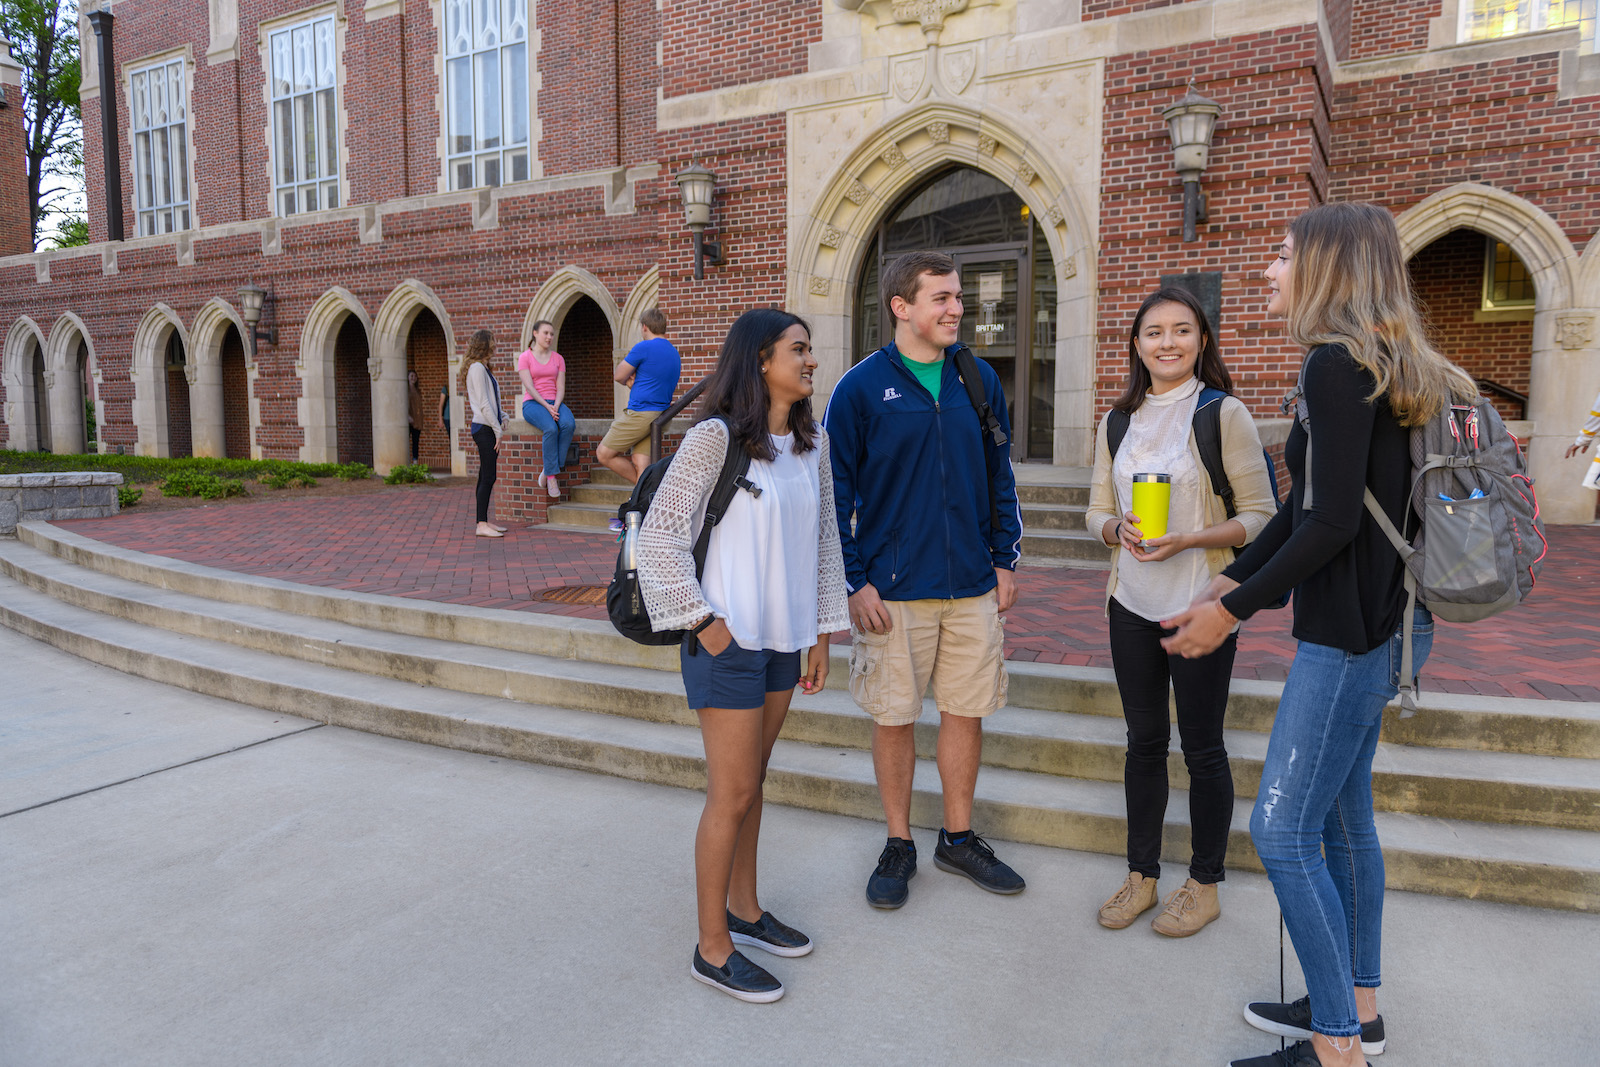 Preliminary results from the 1,877 faculty and staff survey responses are trending positively for these four values: demonstrating that students are our top priority, striving for excellence, acting ethically, and championing innovation. 